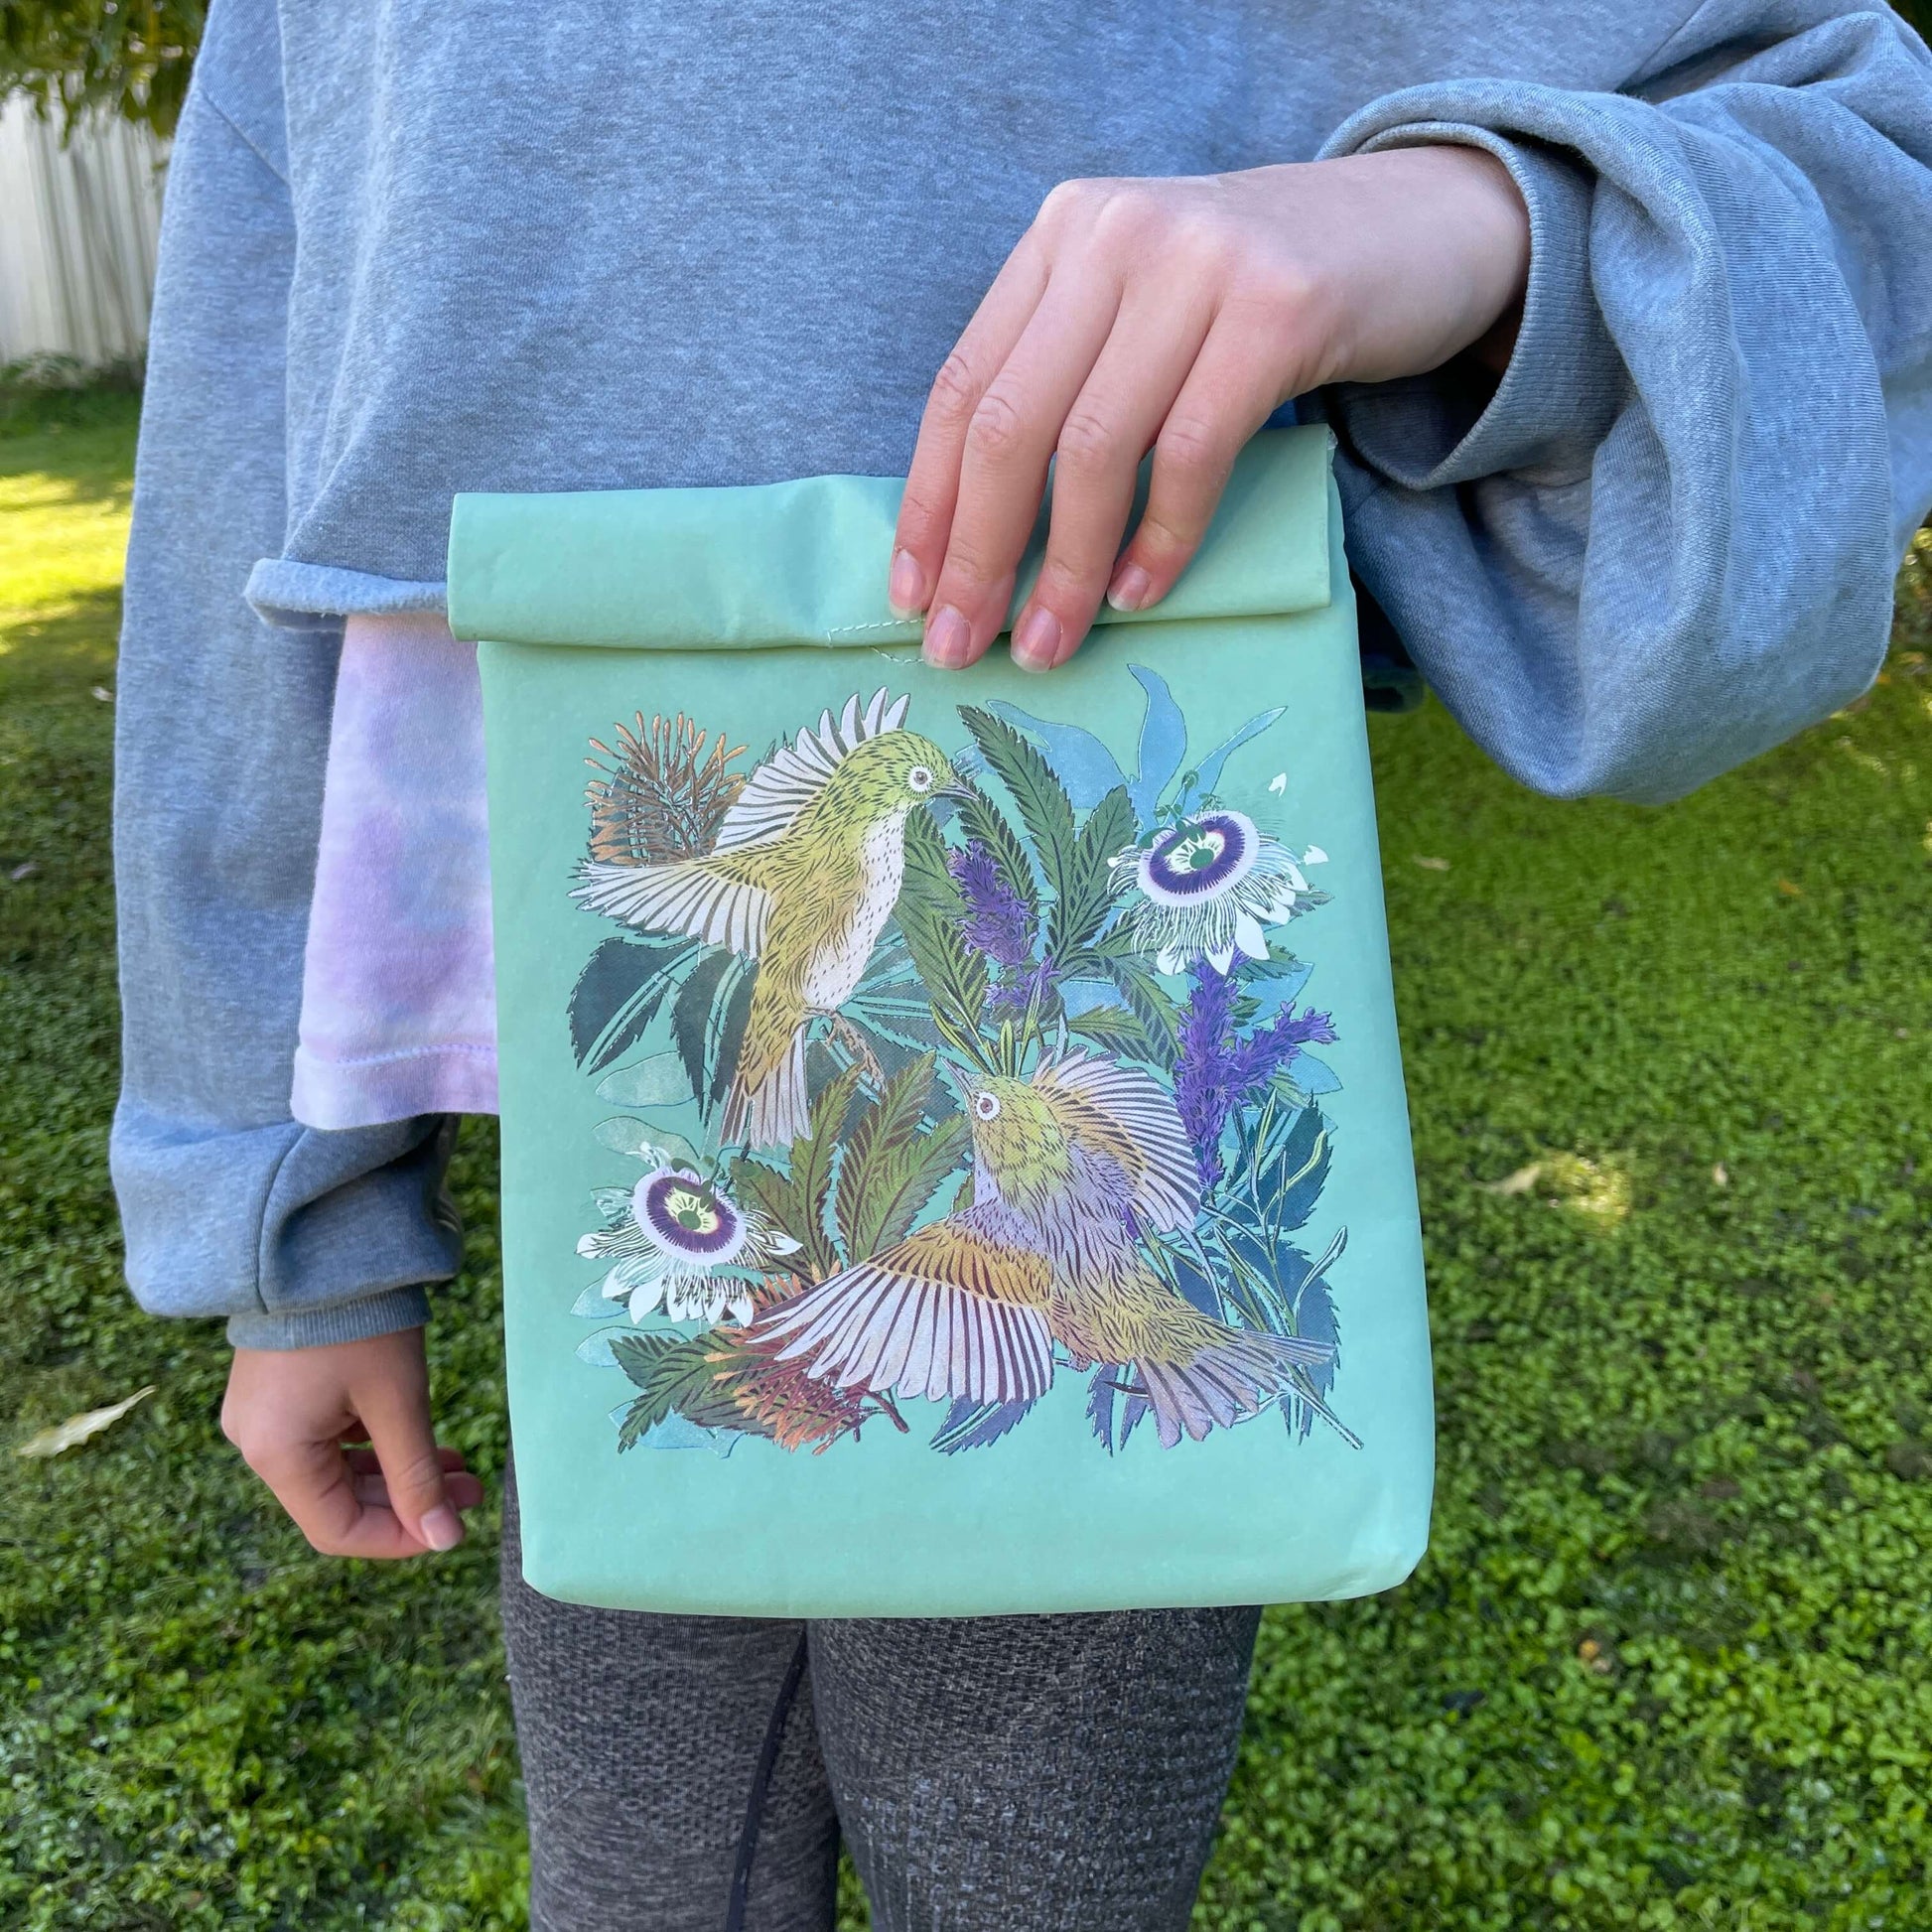 Person holding a light blue folding paper style lunch bag with floral and bird design.